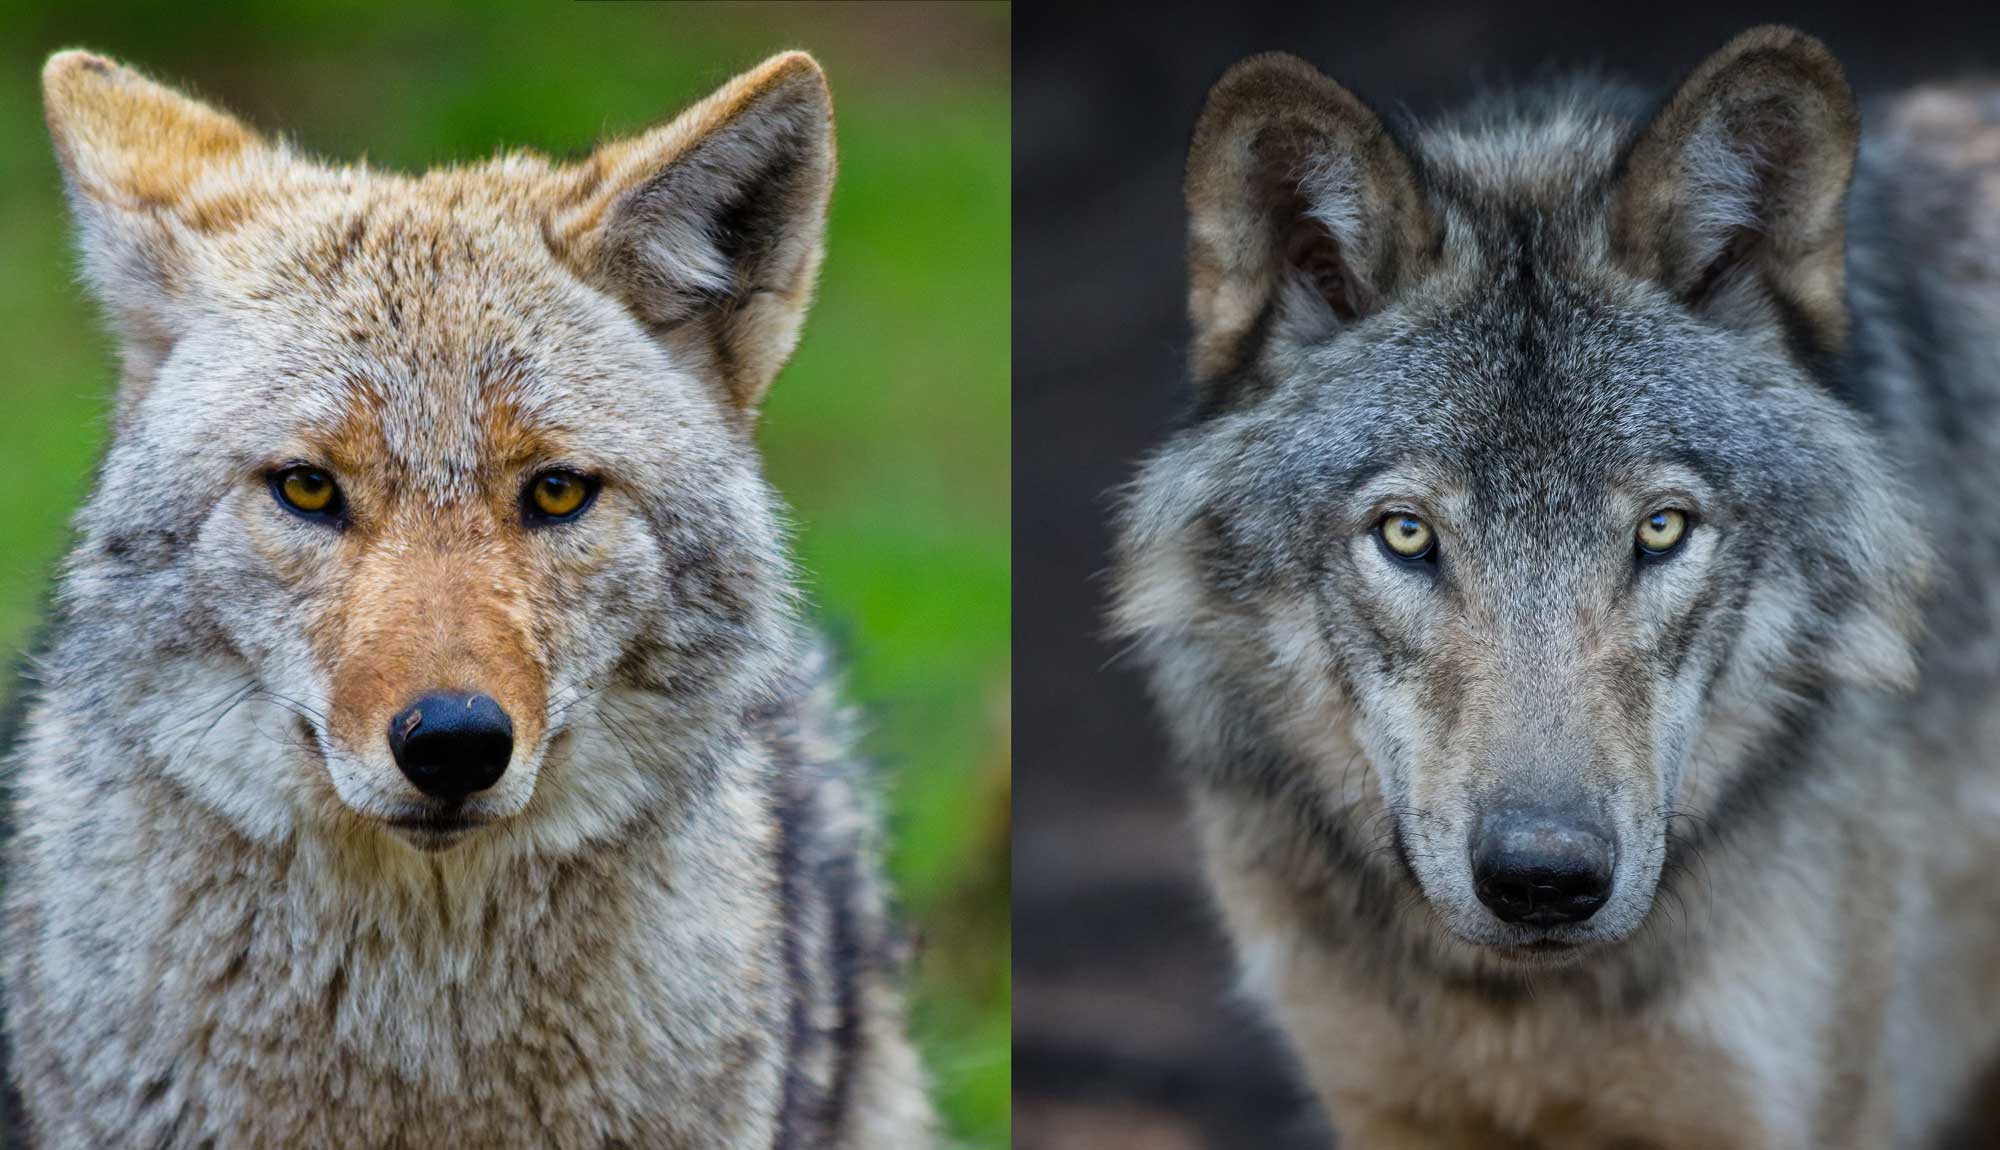 A coyote is seen on the left and a grey wolf on the right.